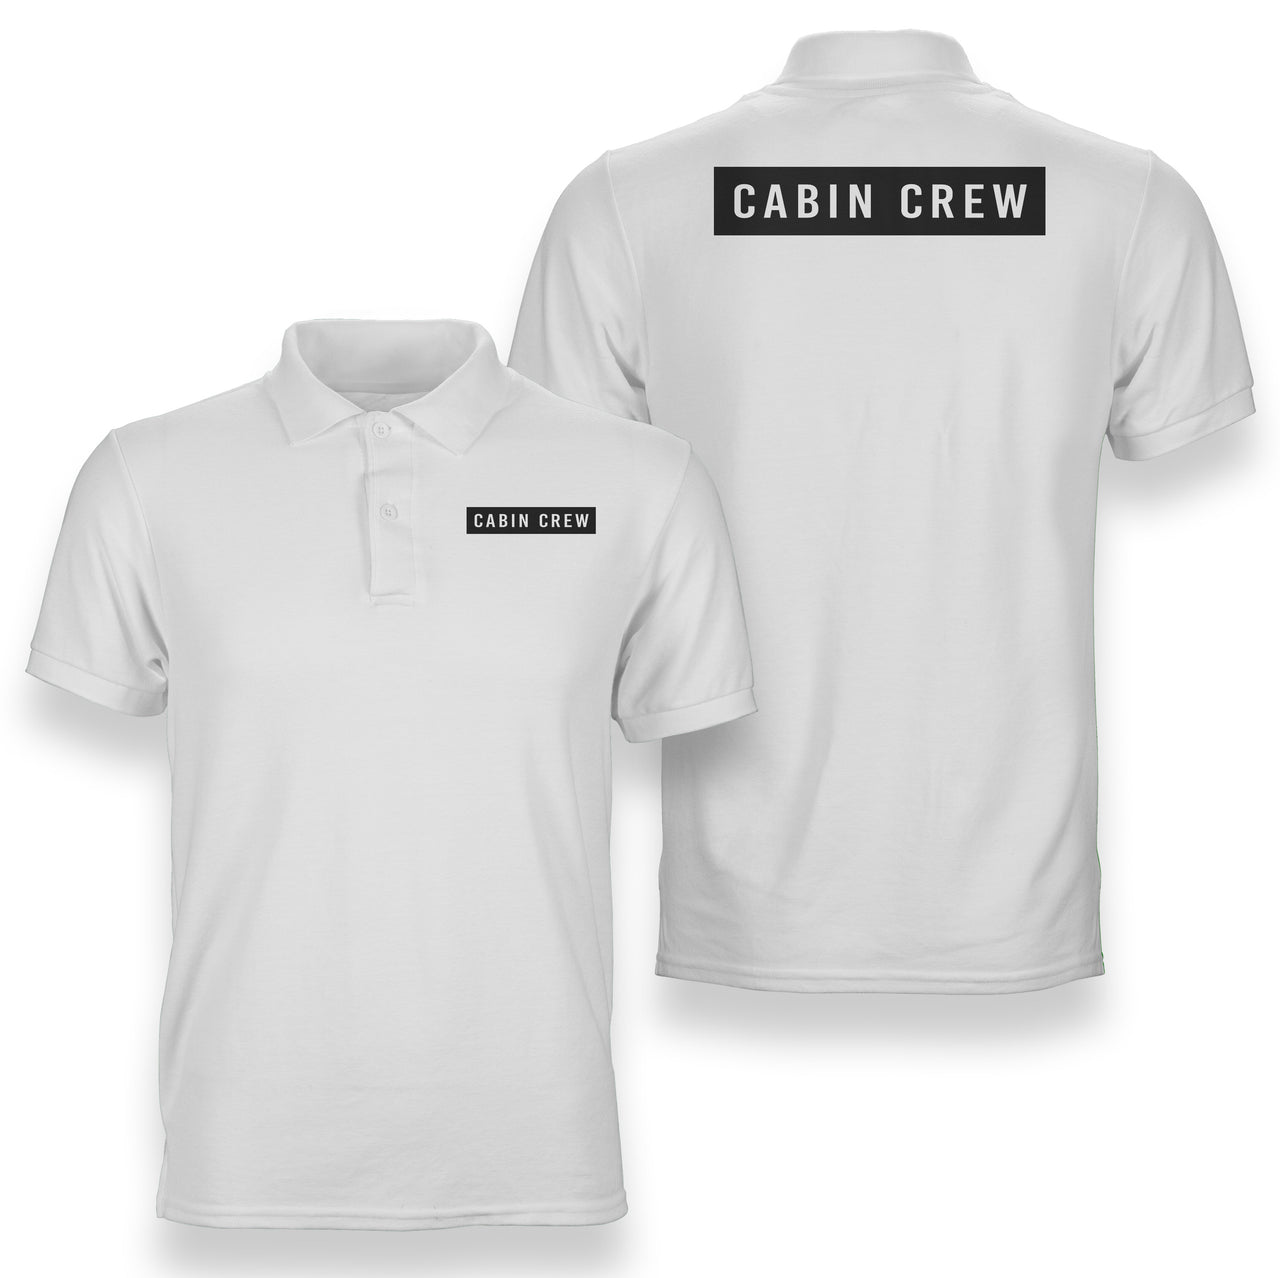 Cabin Crew Text Designed Double Side Polo T-Shirts